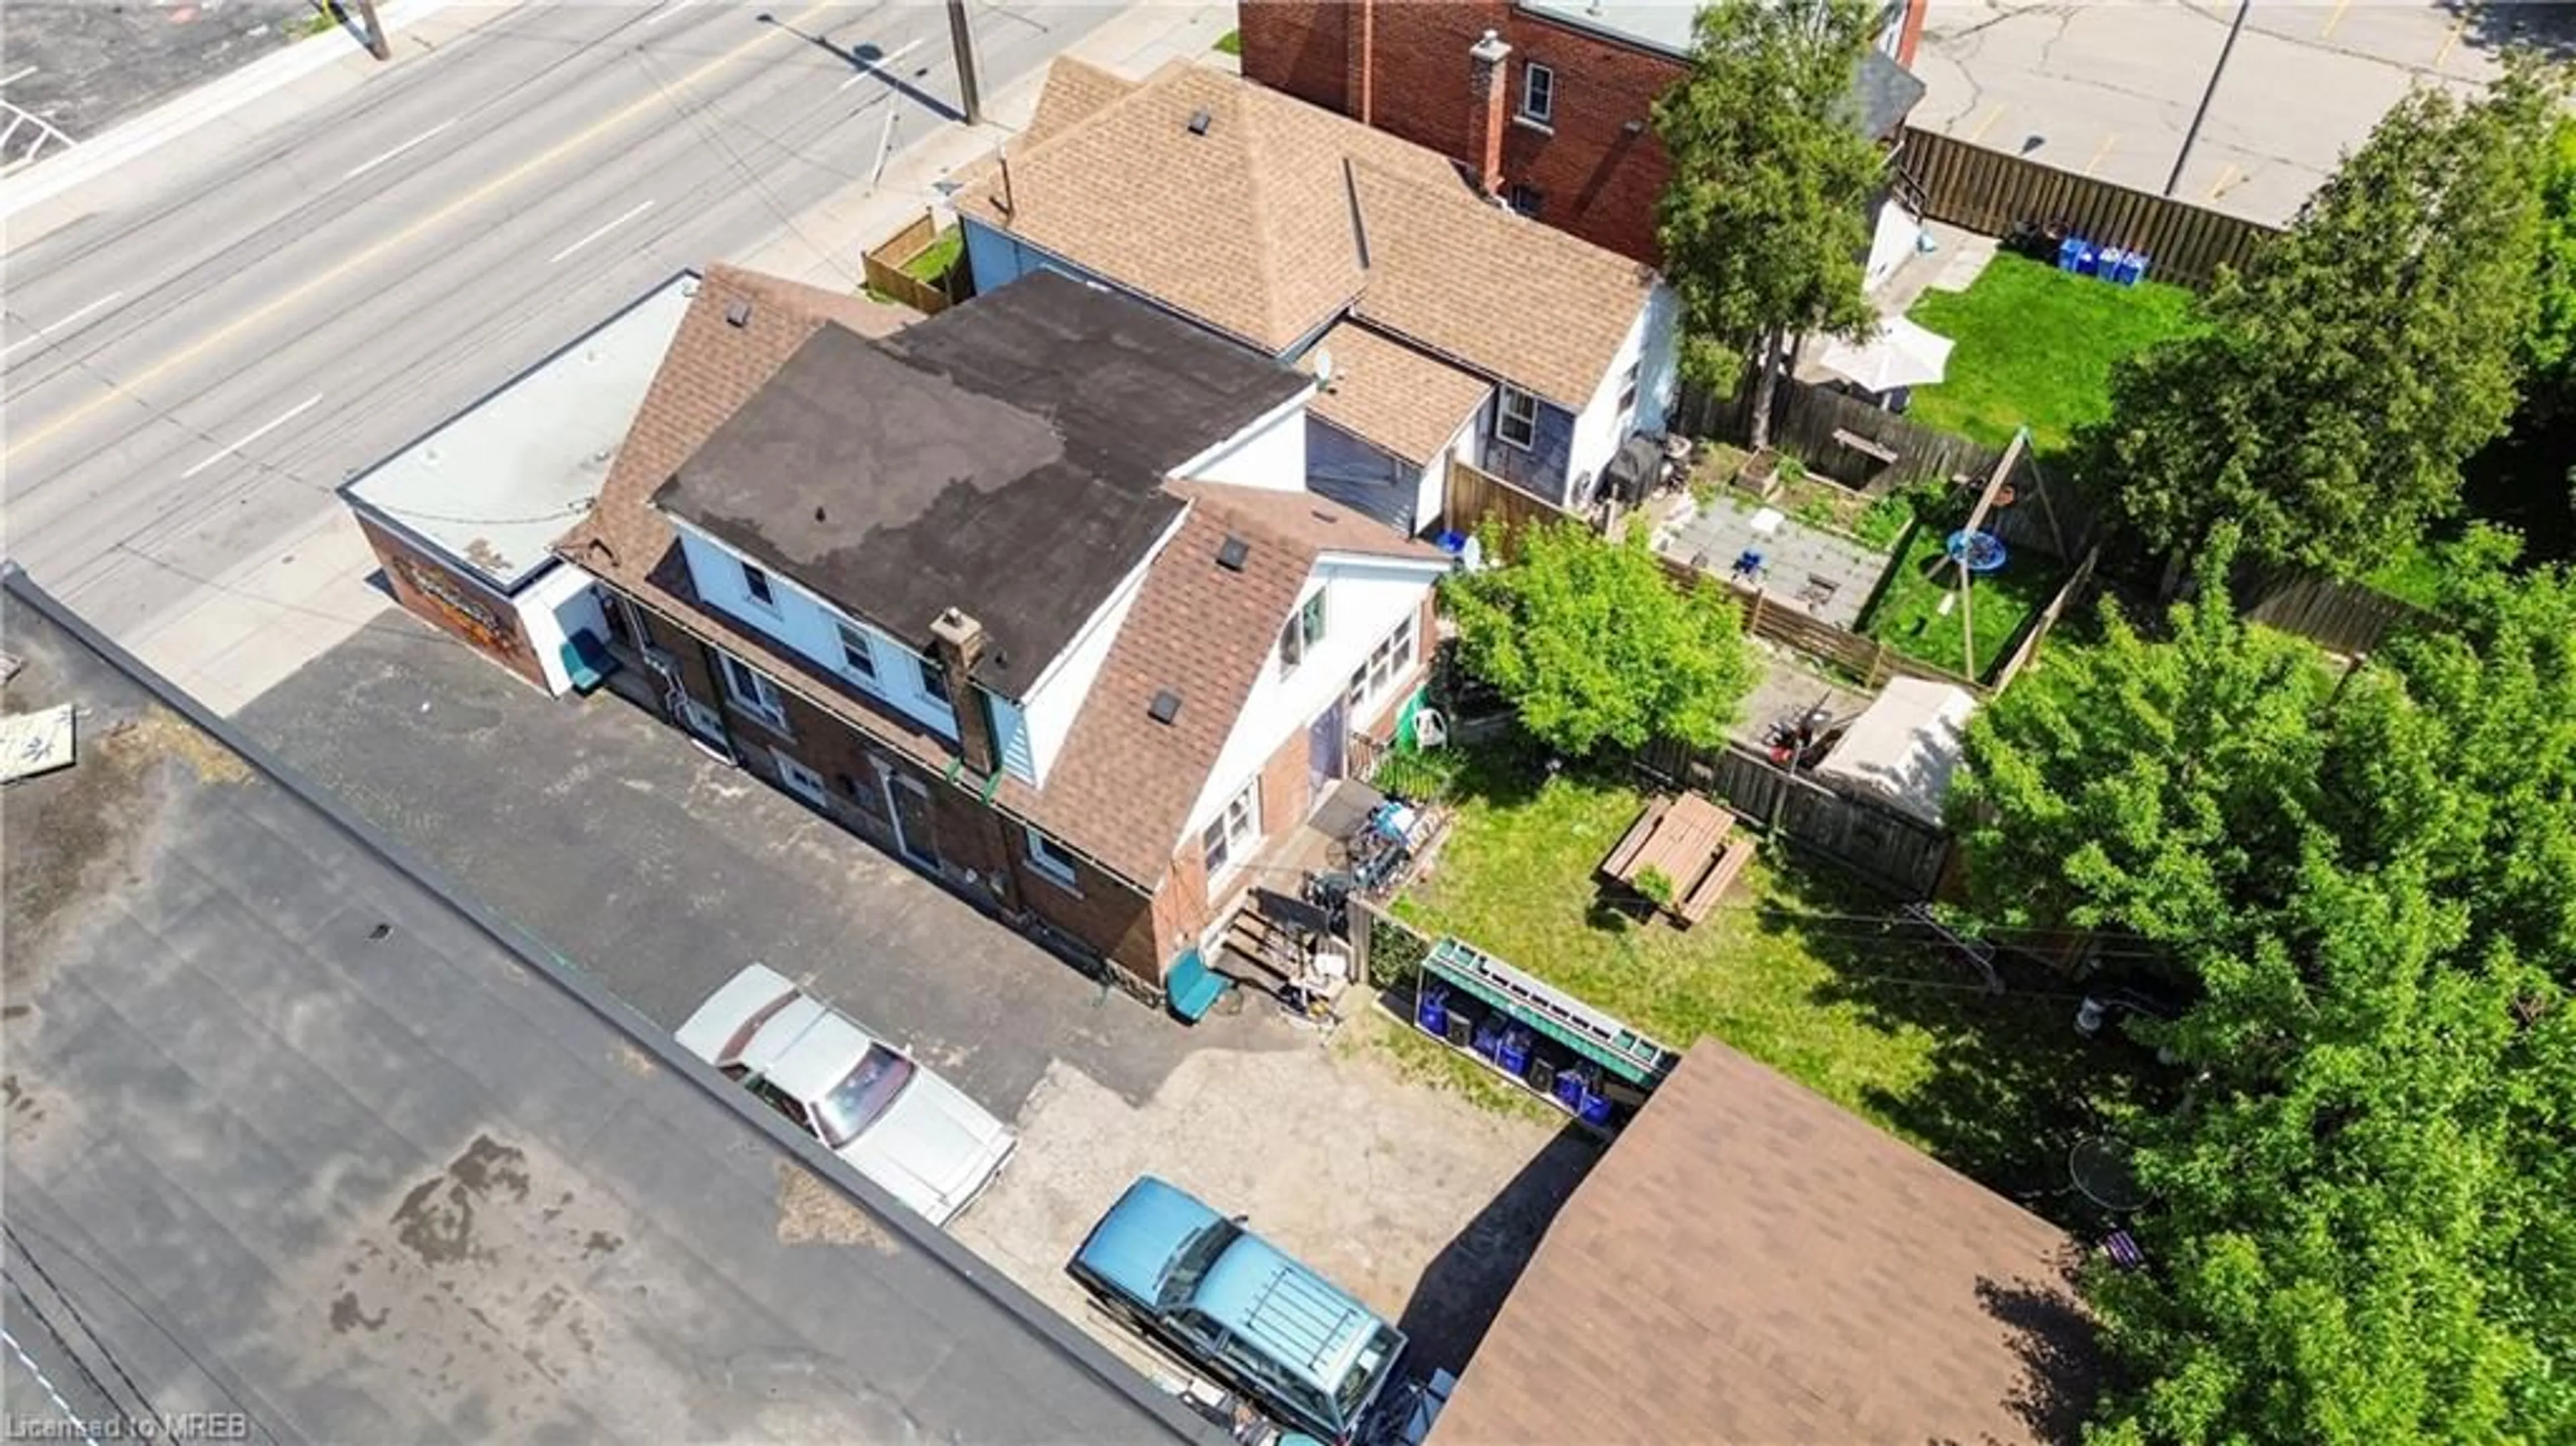 Frontside or backside of a home for 1358 Barton St, Hamilton Ontario L8H 2W3